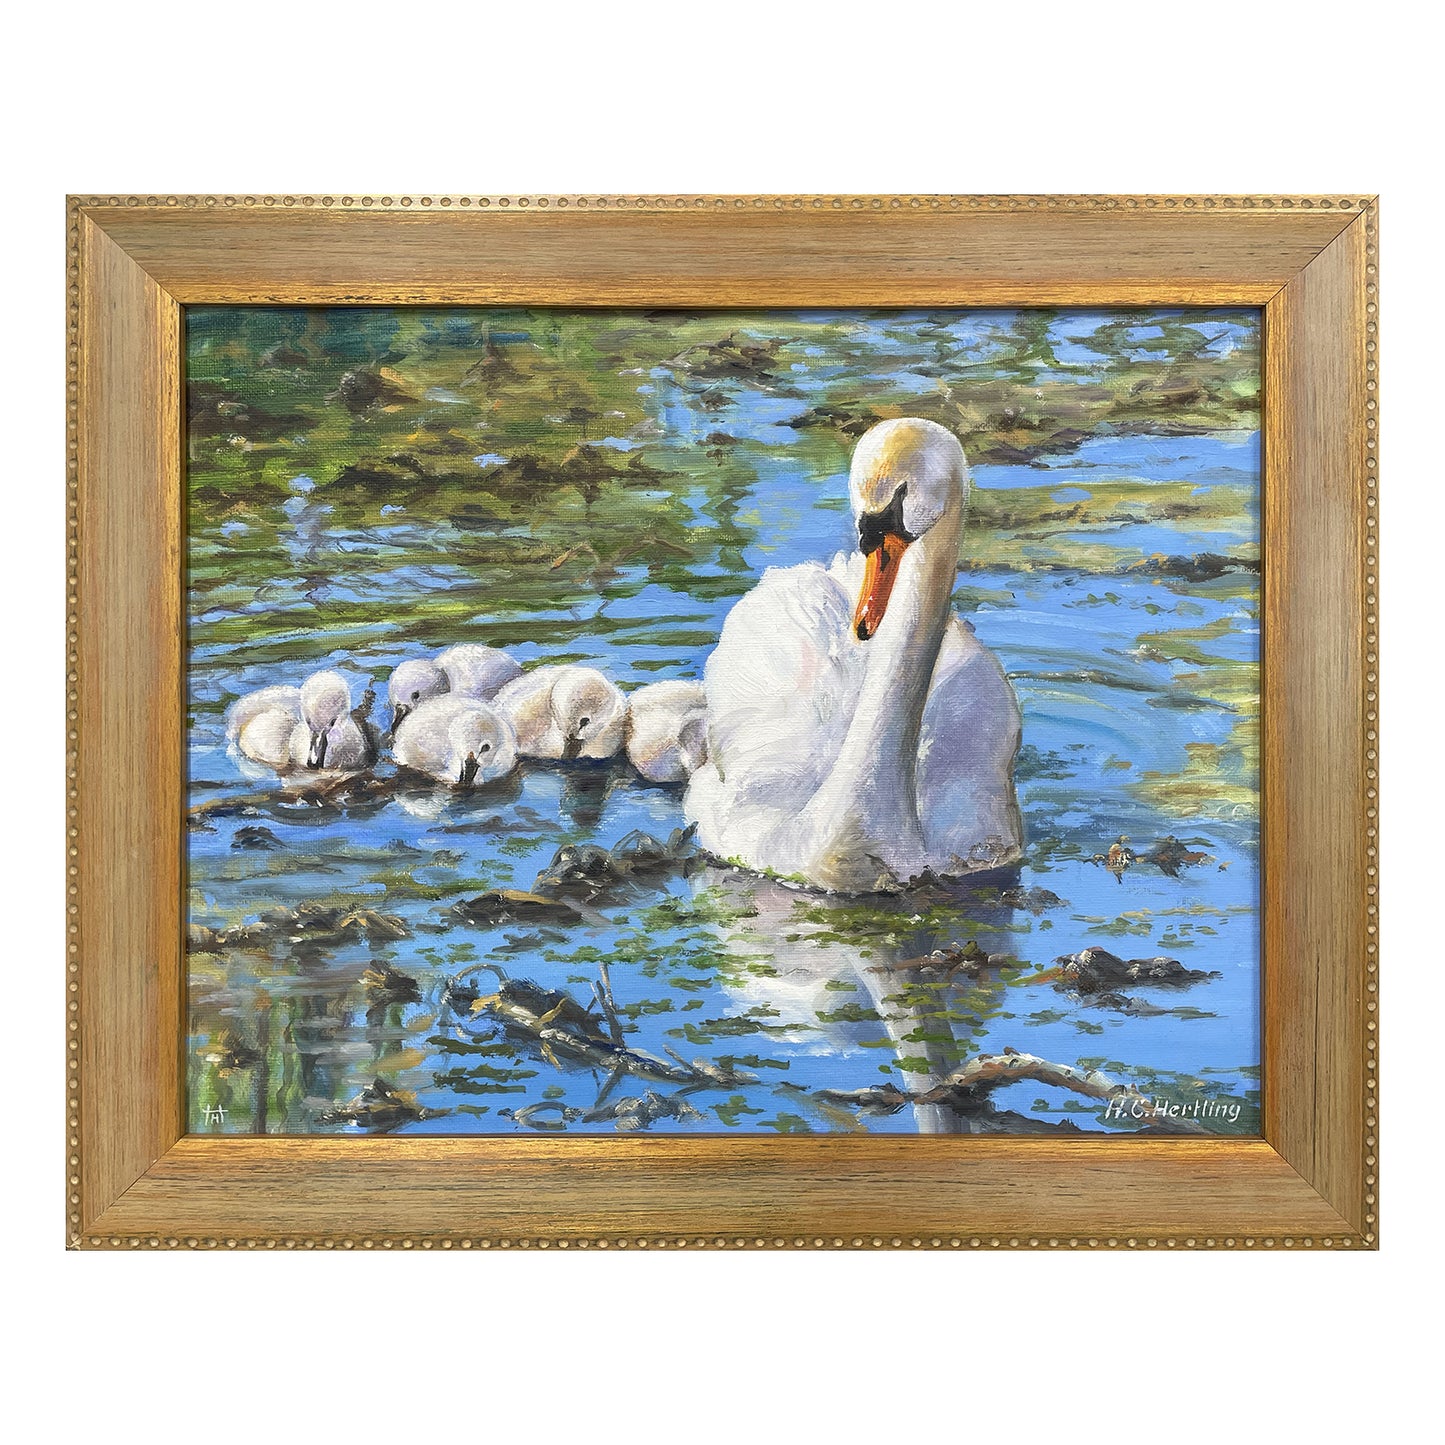 Introduce an elegant touch to your home or office with this Swan Family Oil Painting. This original artwork by Heiner Hertling captures the beauty of lakeside living and the loving bond between a mother swan and her babies. Its calming effect will enhance any space, reflecting the artist's appreciation for nature.  